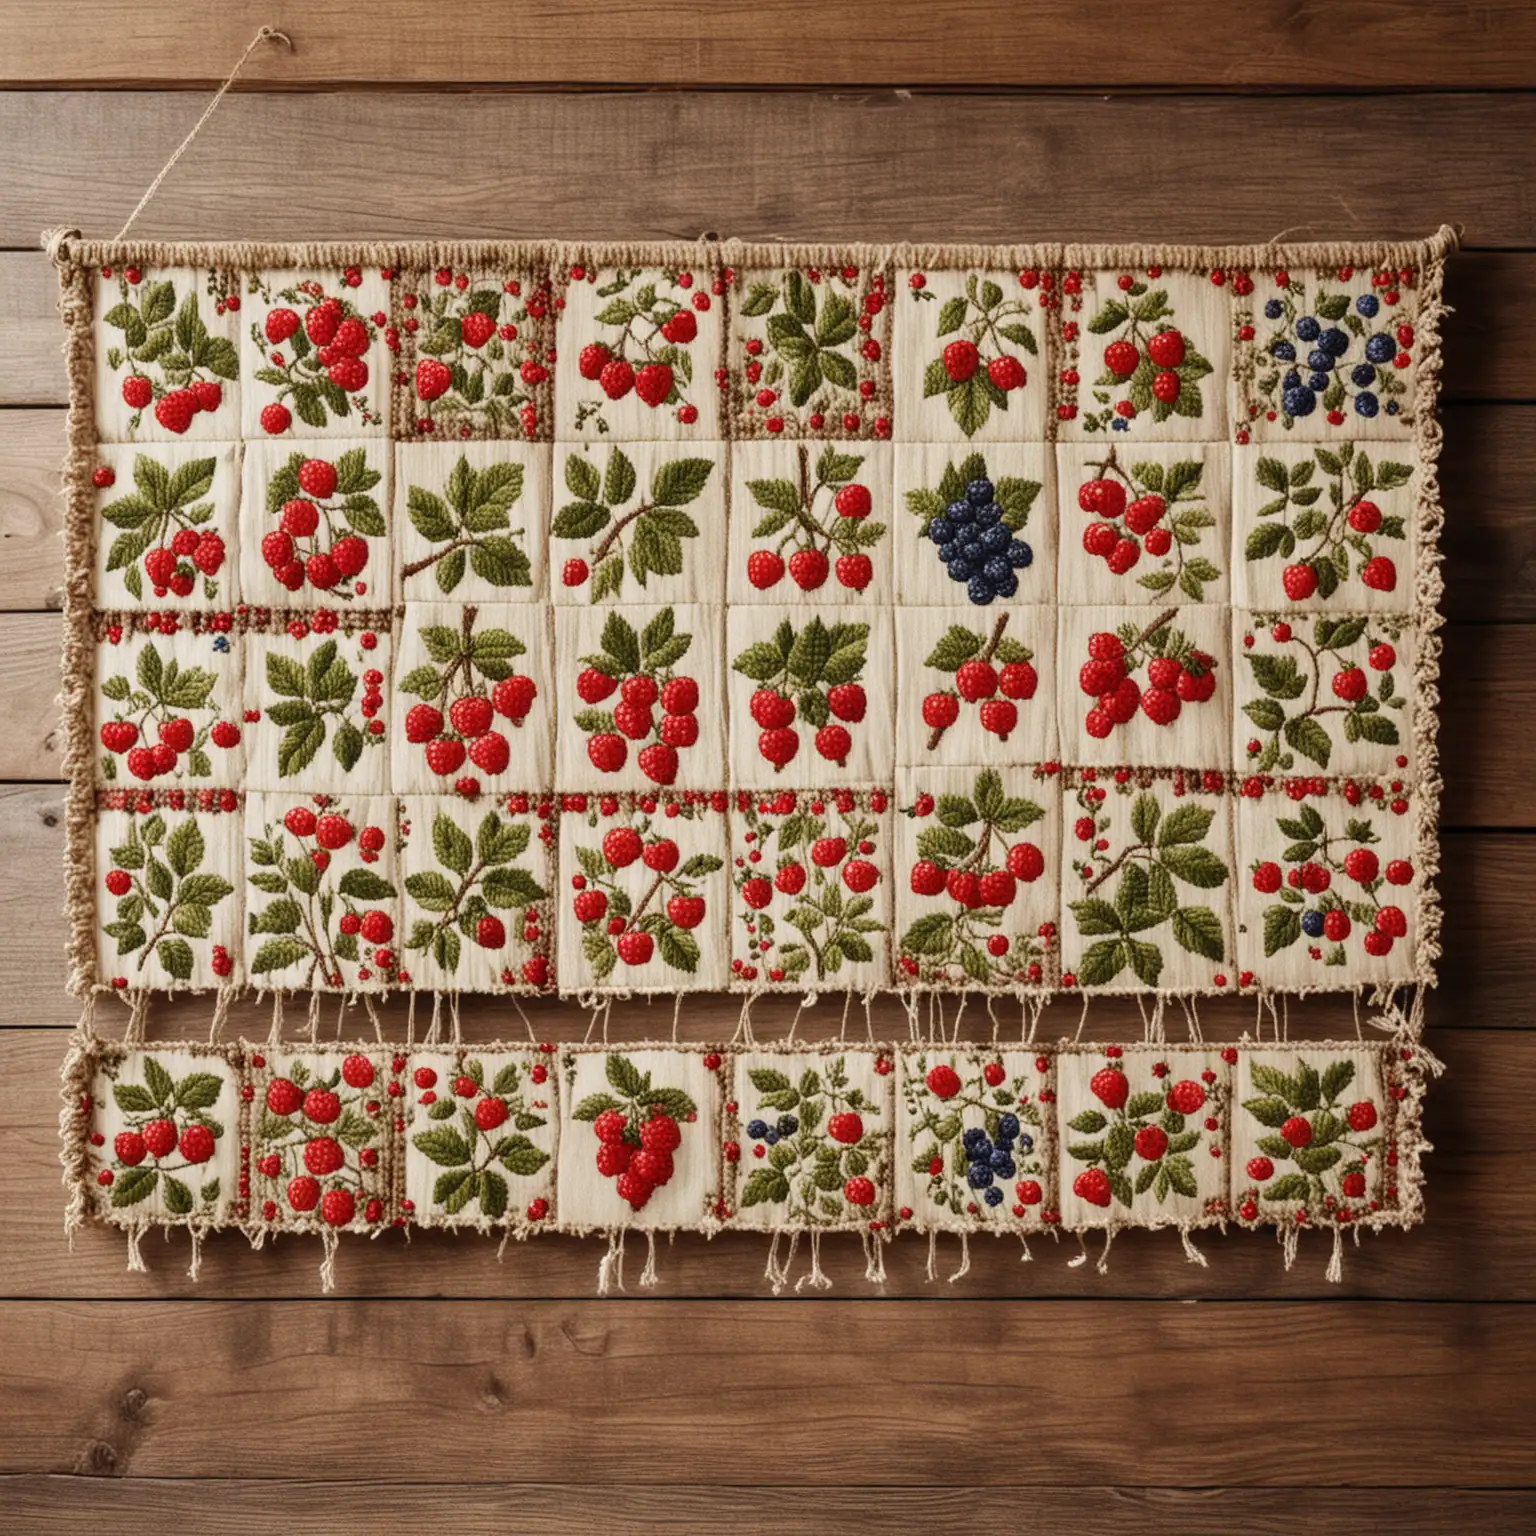 CrossStitched-Berries-on-Wooden-Wall